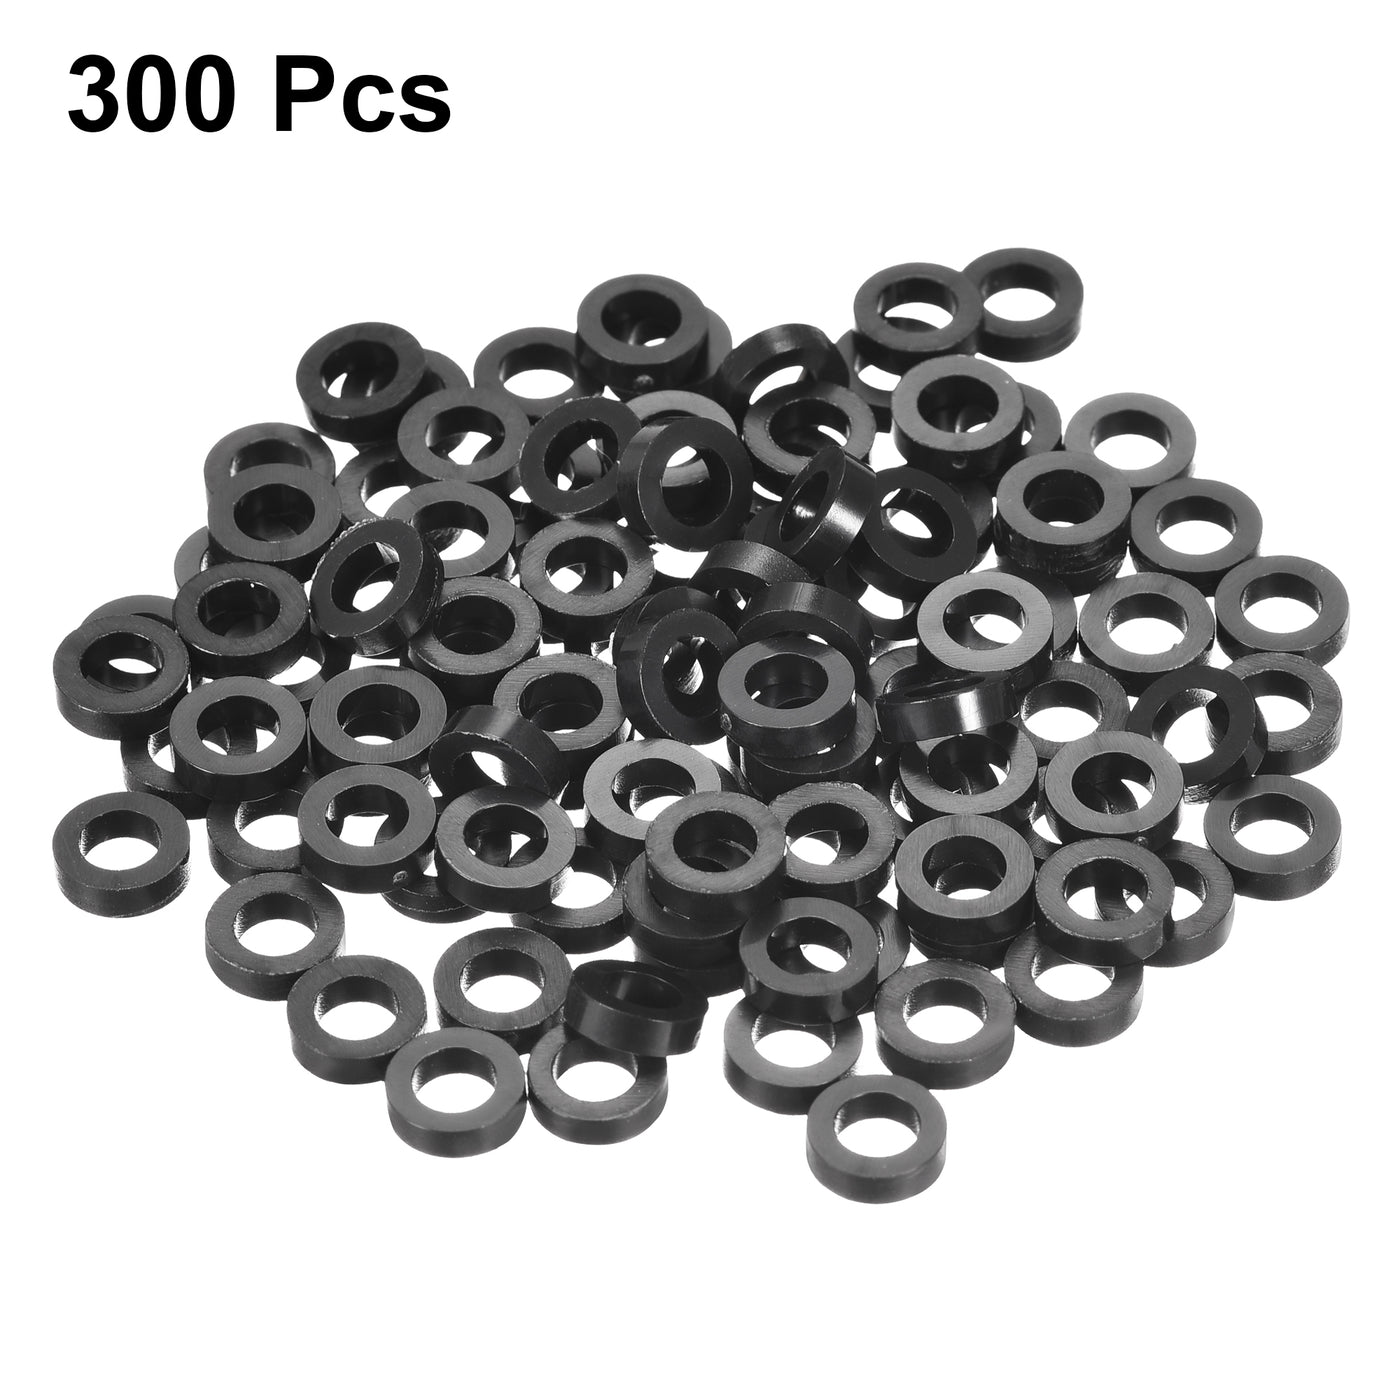 uxcell Uxcell Nylon Round Spacer Washer 4.2mmx7mmx2mm for M4 Screws Black 300Pcs